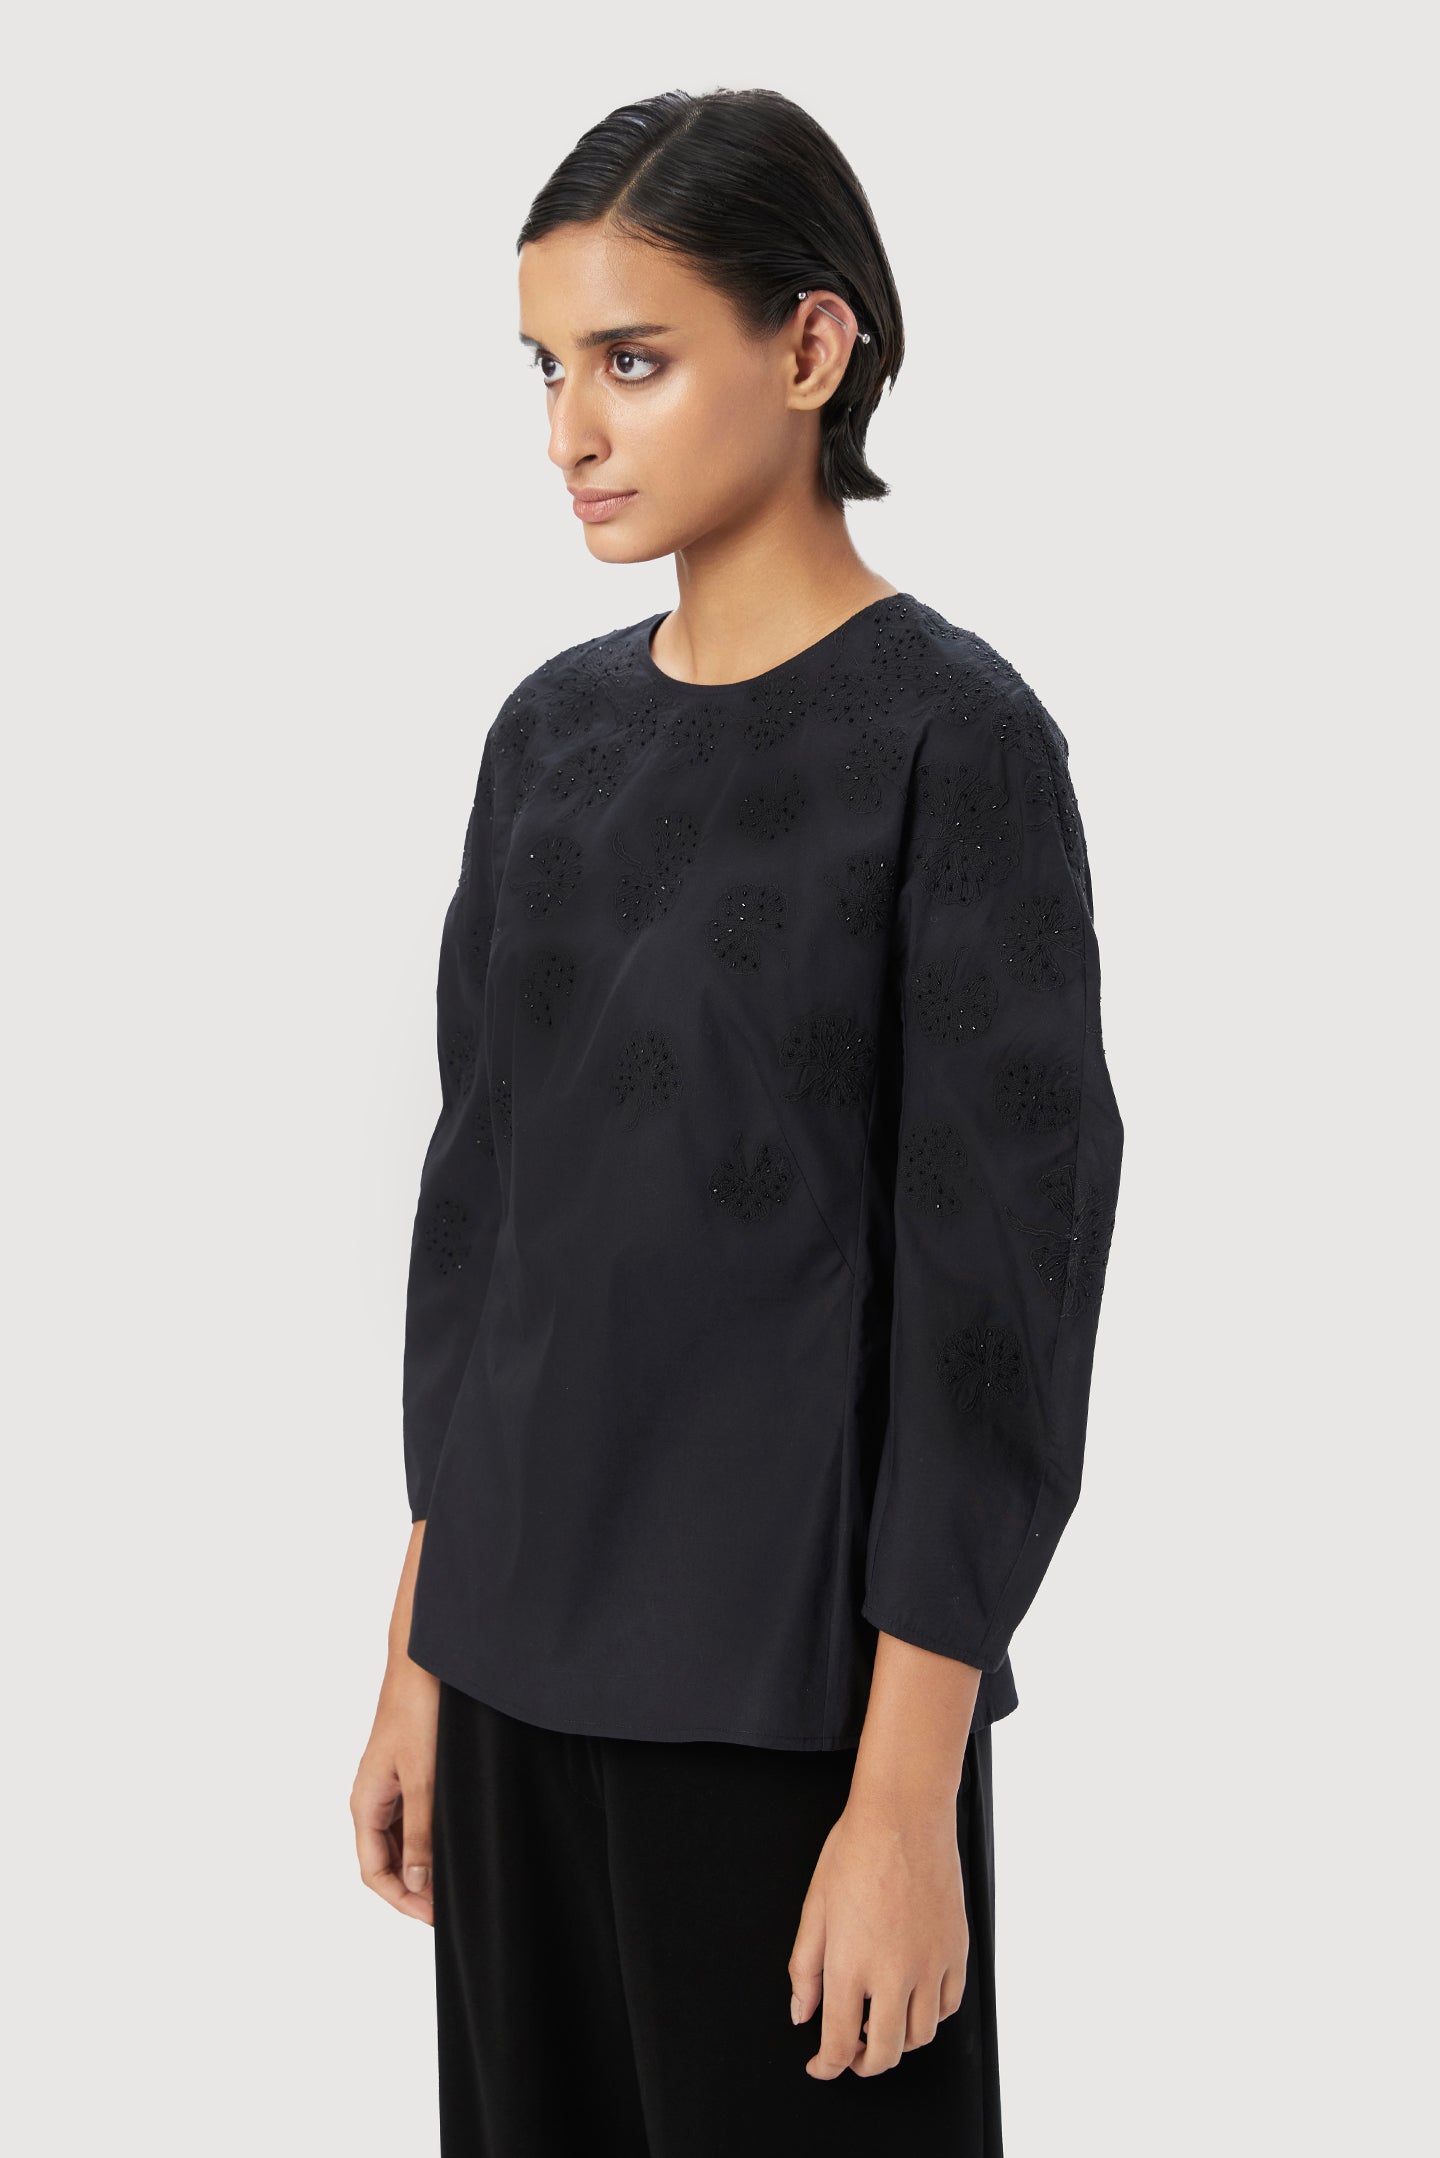 Straight Fit Top with Soft Rounded Sleeves